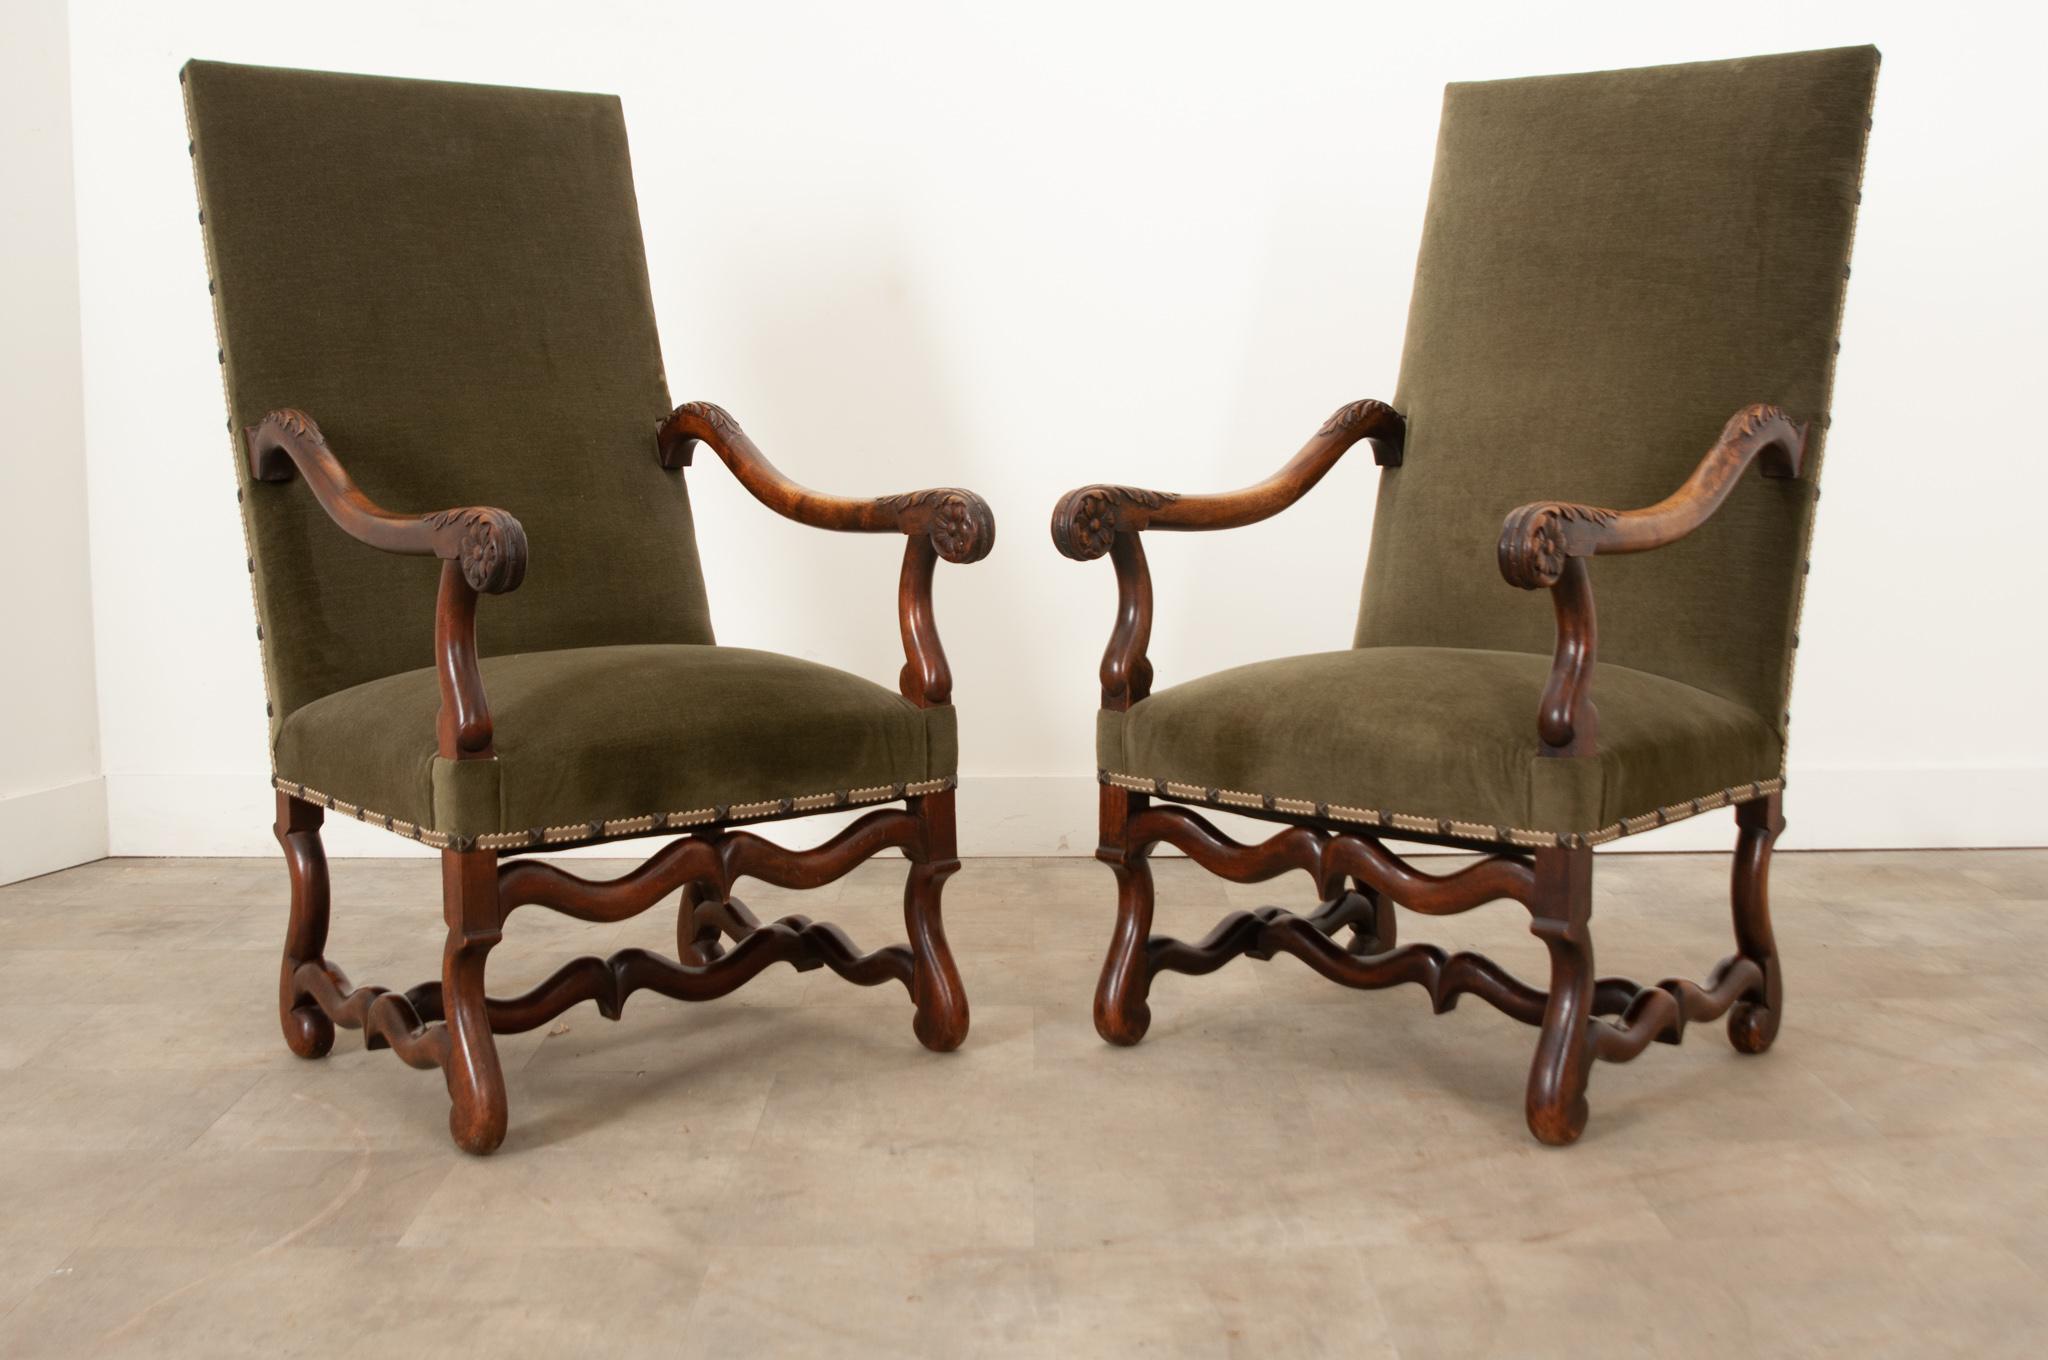 An impressive pair of French Os de Mouton armchairs with wonderfully carved details hand-crafted in France in the 19th century. These large armchairs are very comfortable and covered with new green velvet upholstery, thoughtful grosgrain trim, and